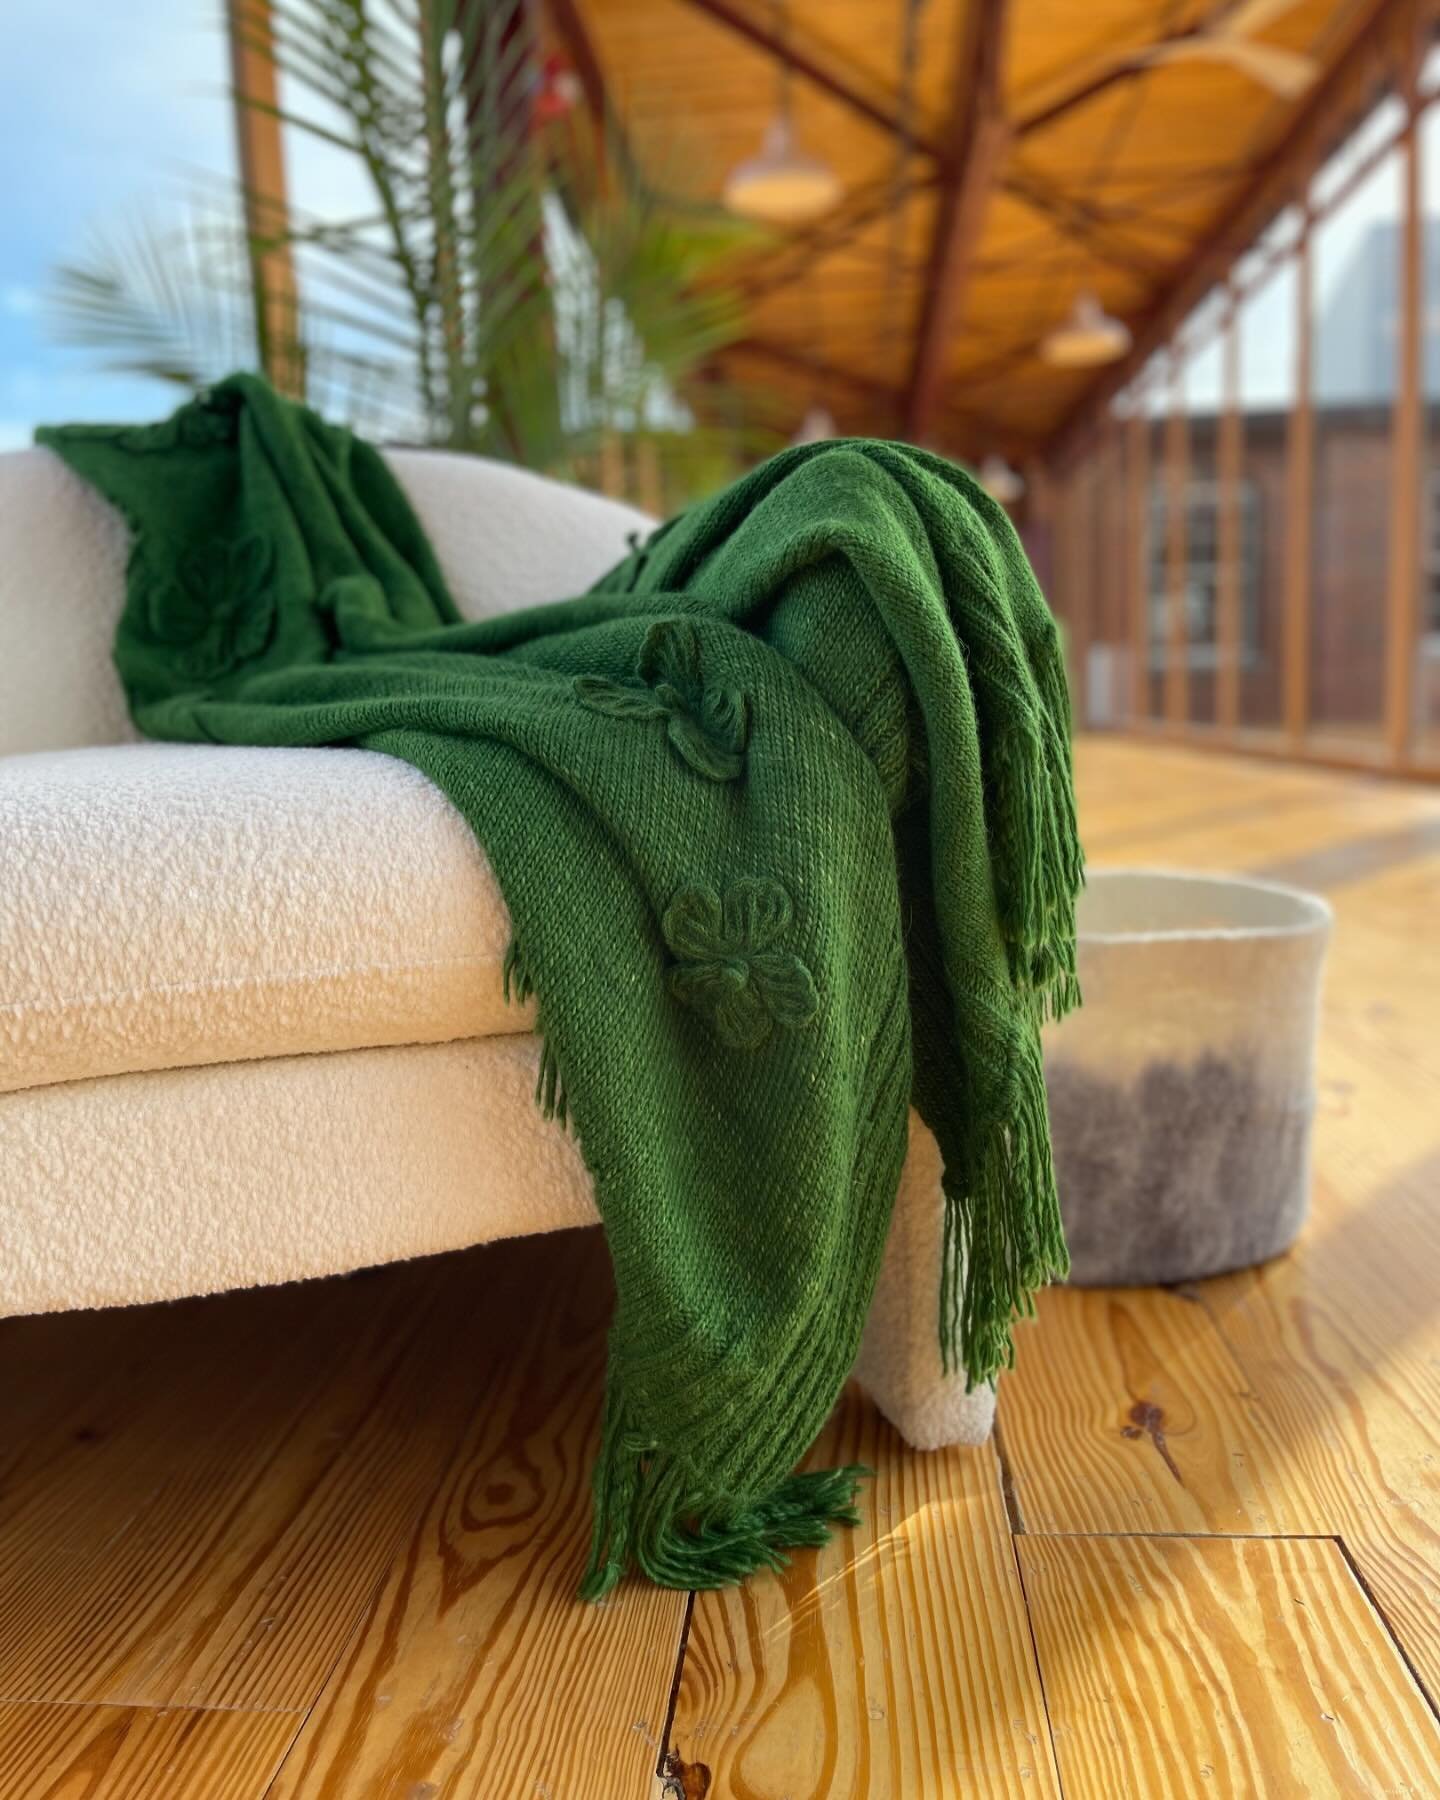 There&rsquo;s something special about our Botanica throw. It&rsquo;s hand- crocheted and oh so soft! 
&mdash;&mdash;&mdash;
📍: Shoppe Object High Point, Market Square, Booth 1910
.
.
#artisinal #doveanddonkey 
#homeessentials&nbsp;#hometextiles #alp